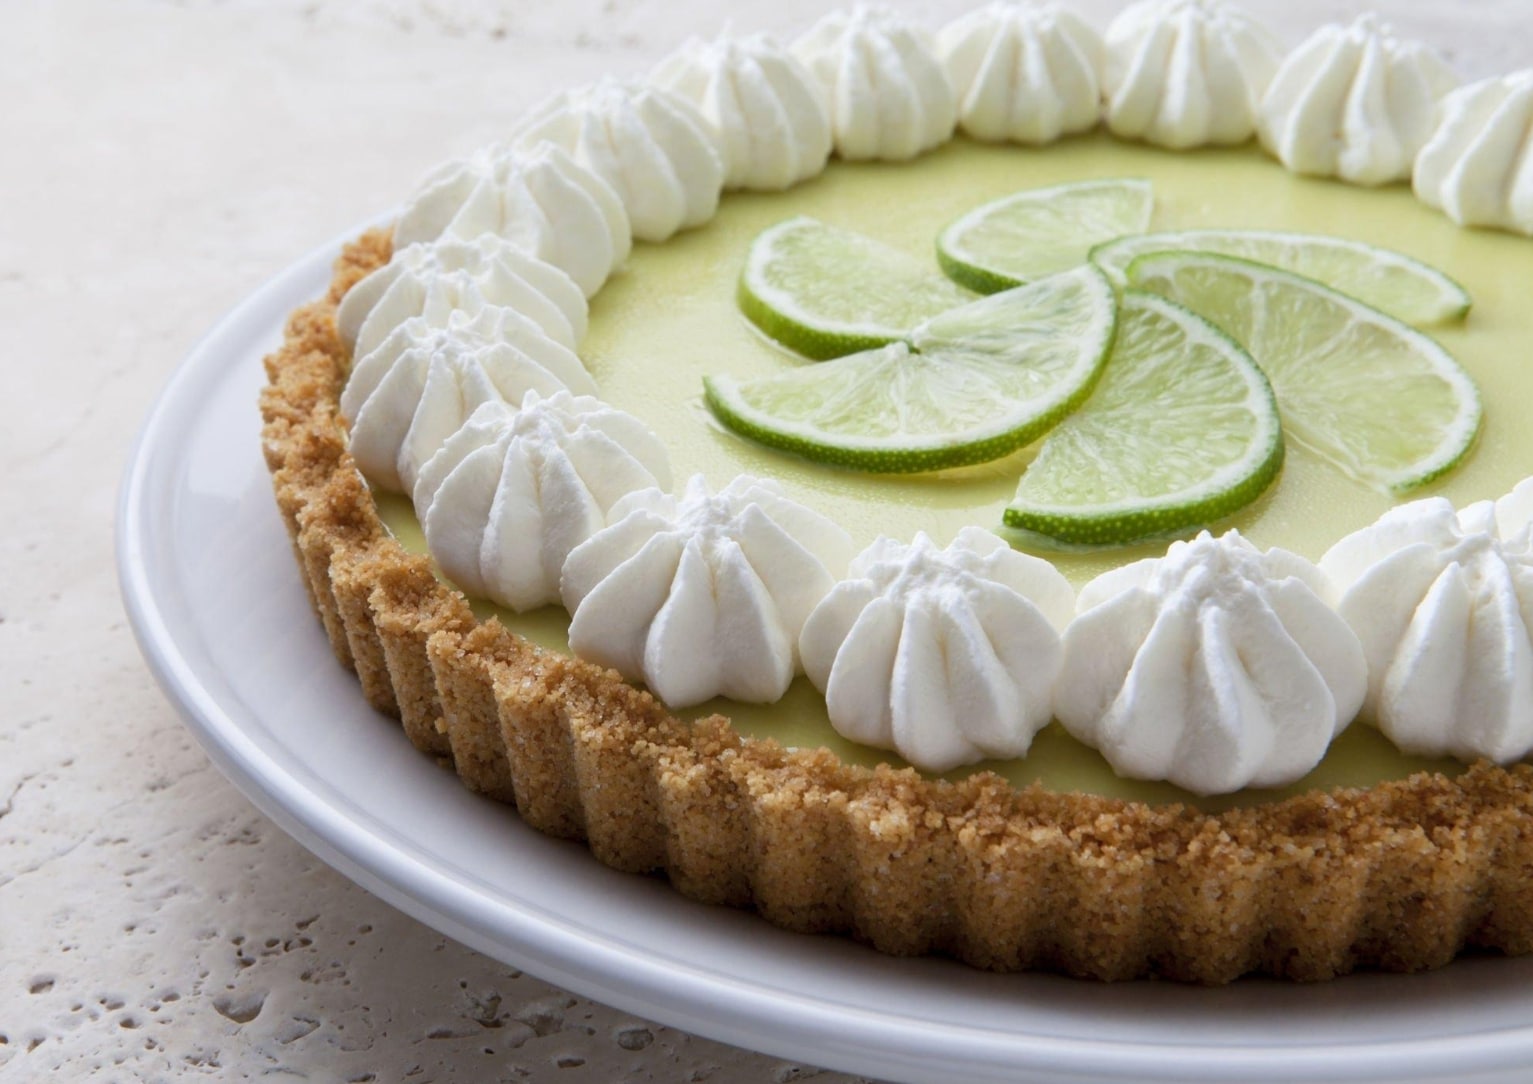 How Many Carbs Are in a Key Lime Pie?